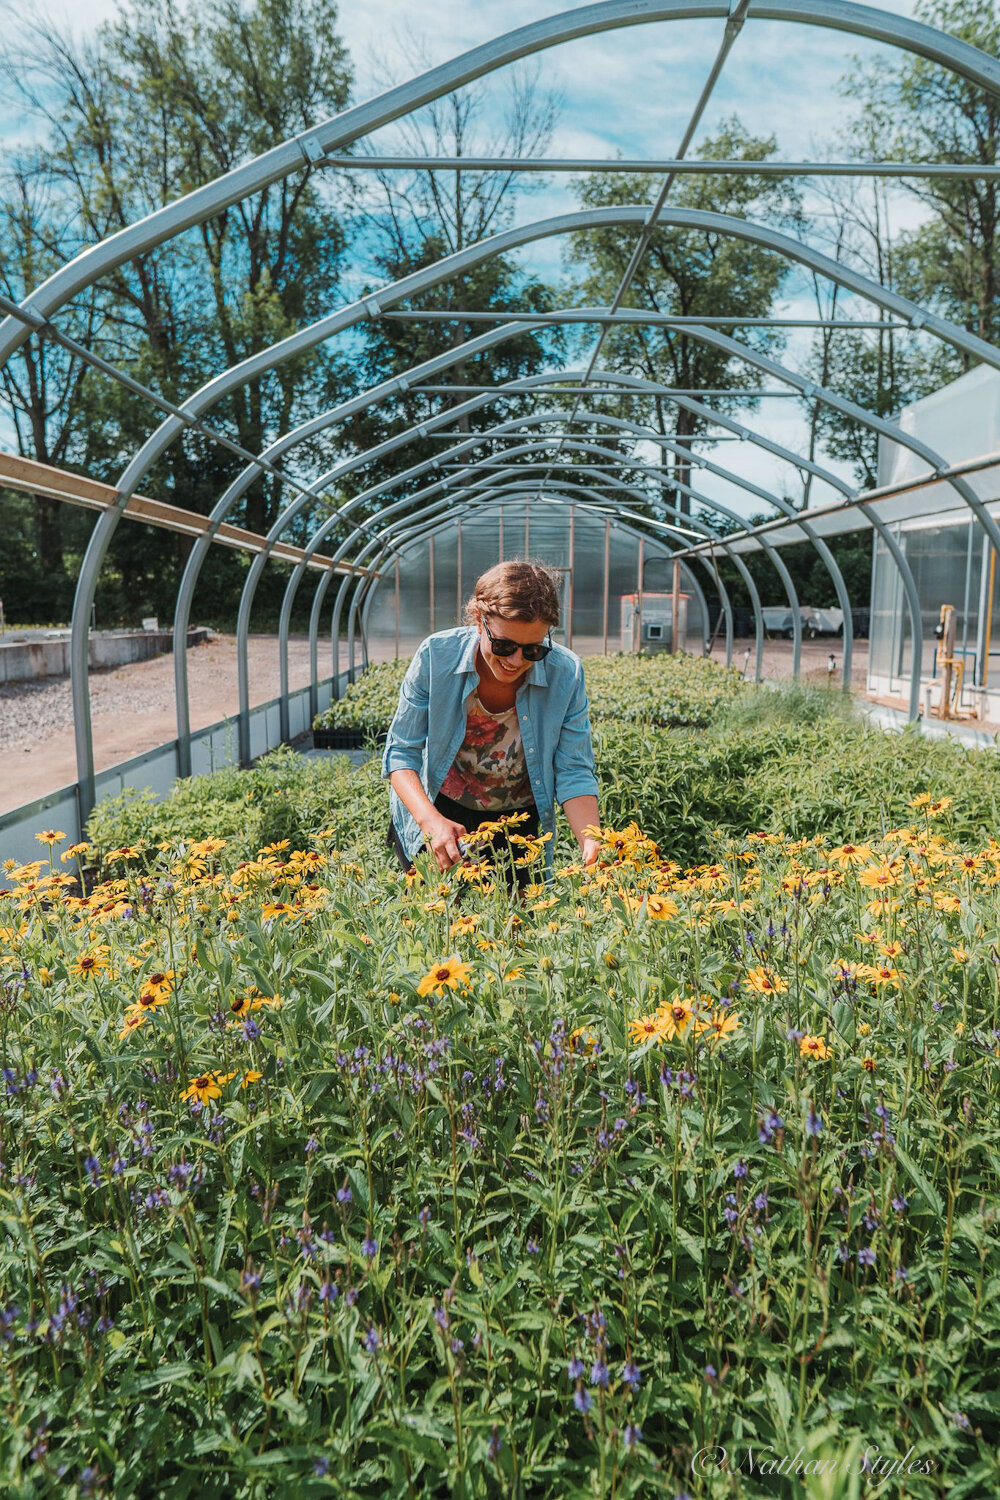 Reyna looks over some of the many wildflowers in one of the ONP greenhouses.